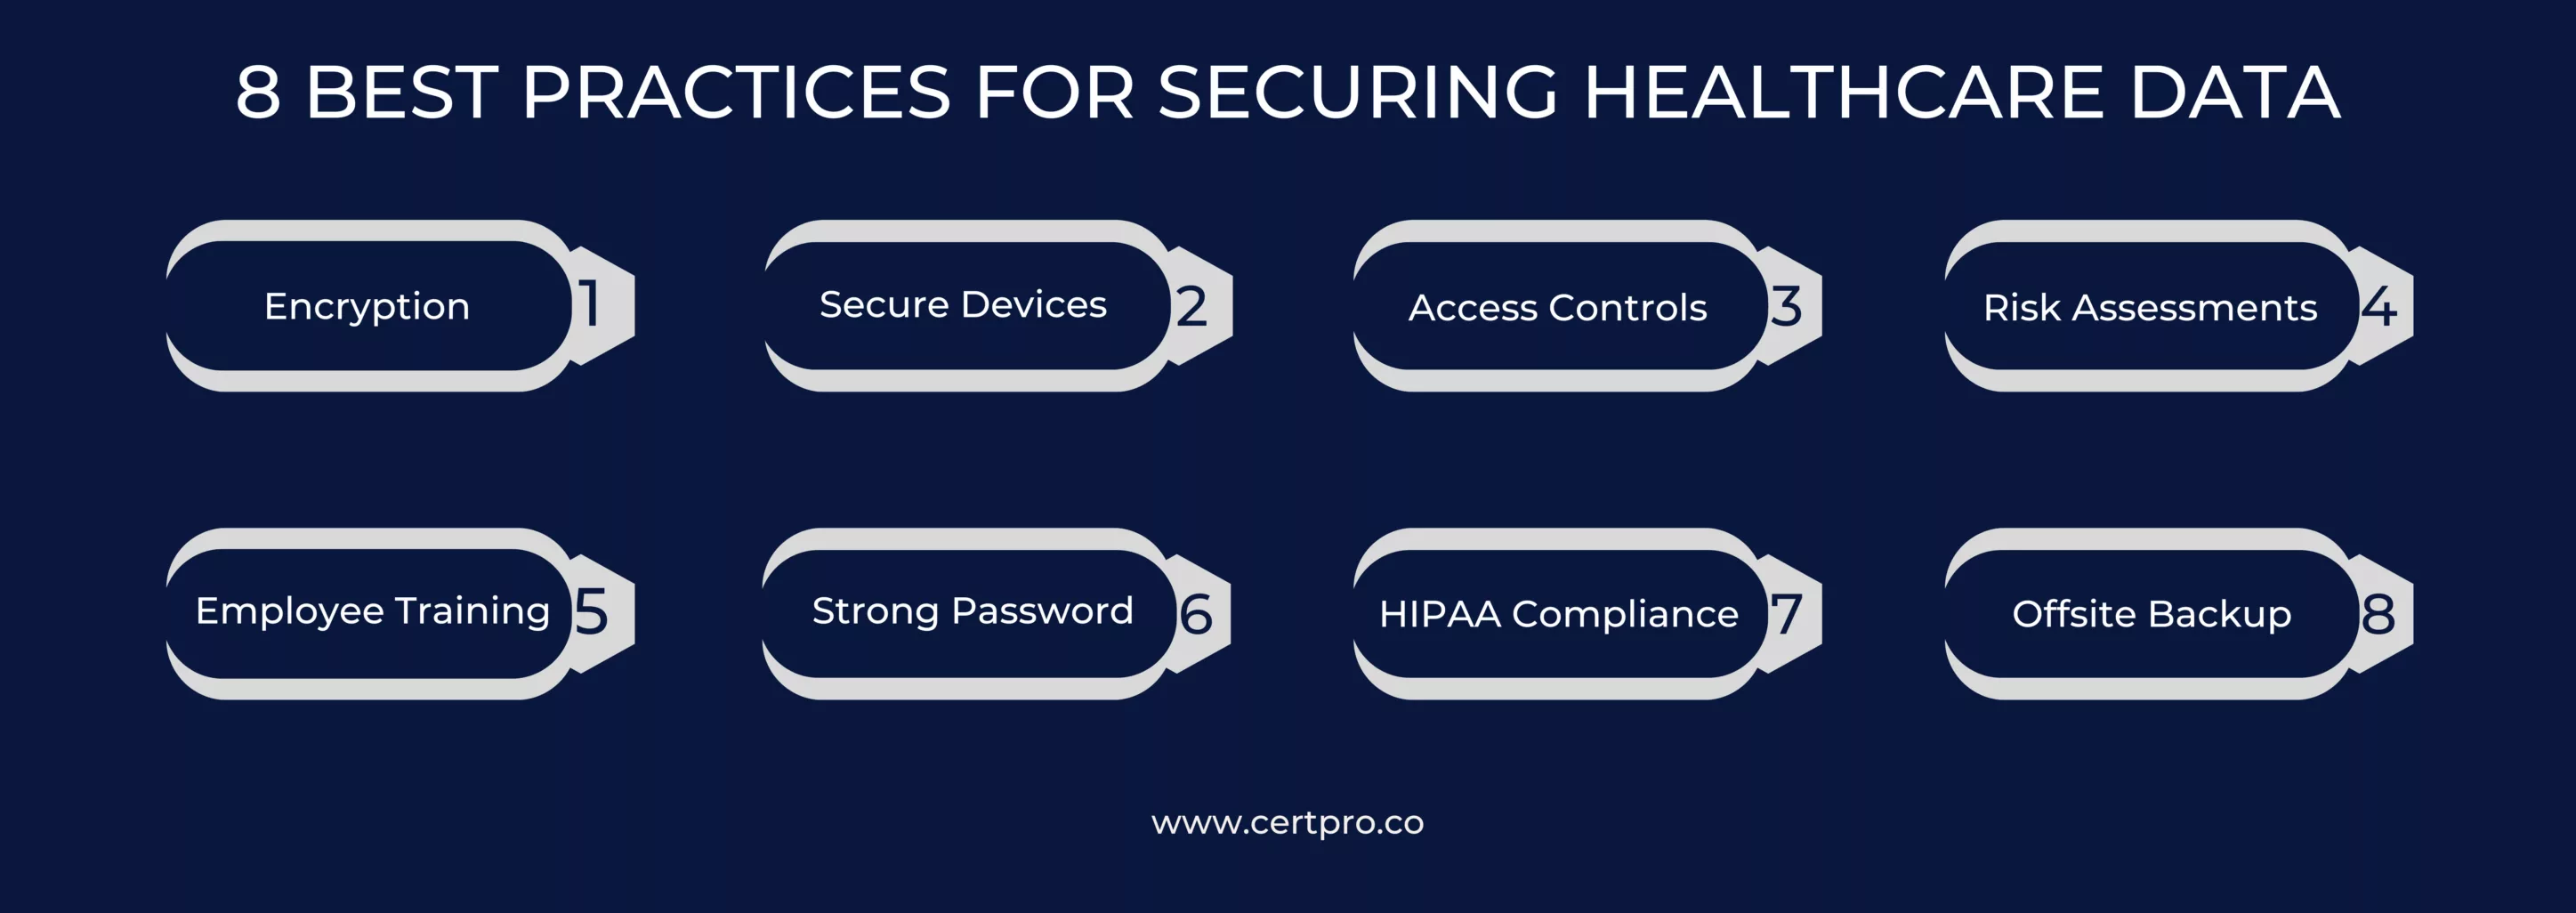 8-BEST-PRACTICES-FOR-SECURING-HEALTHCARE-DATA